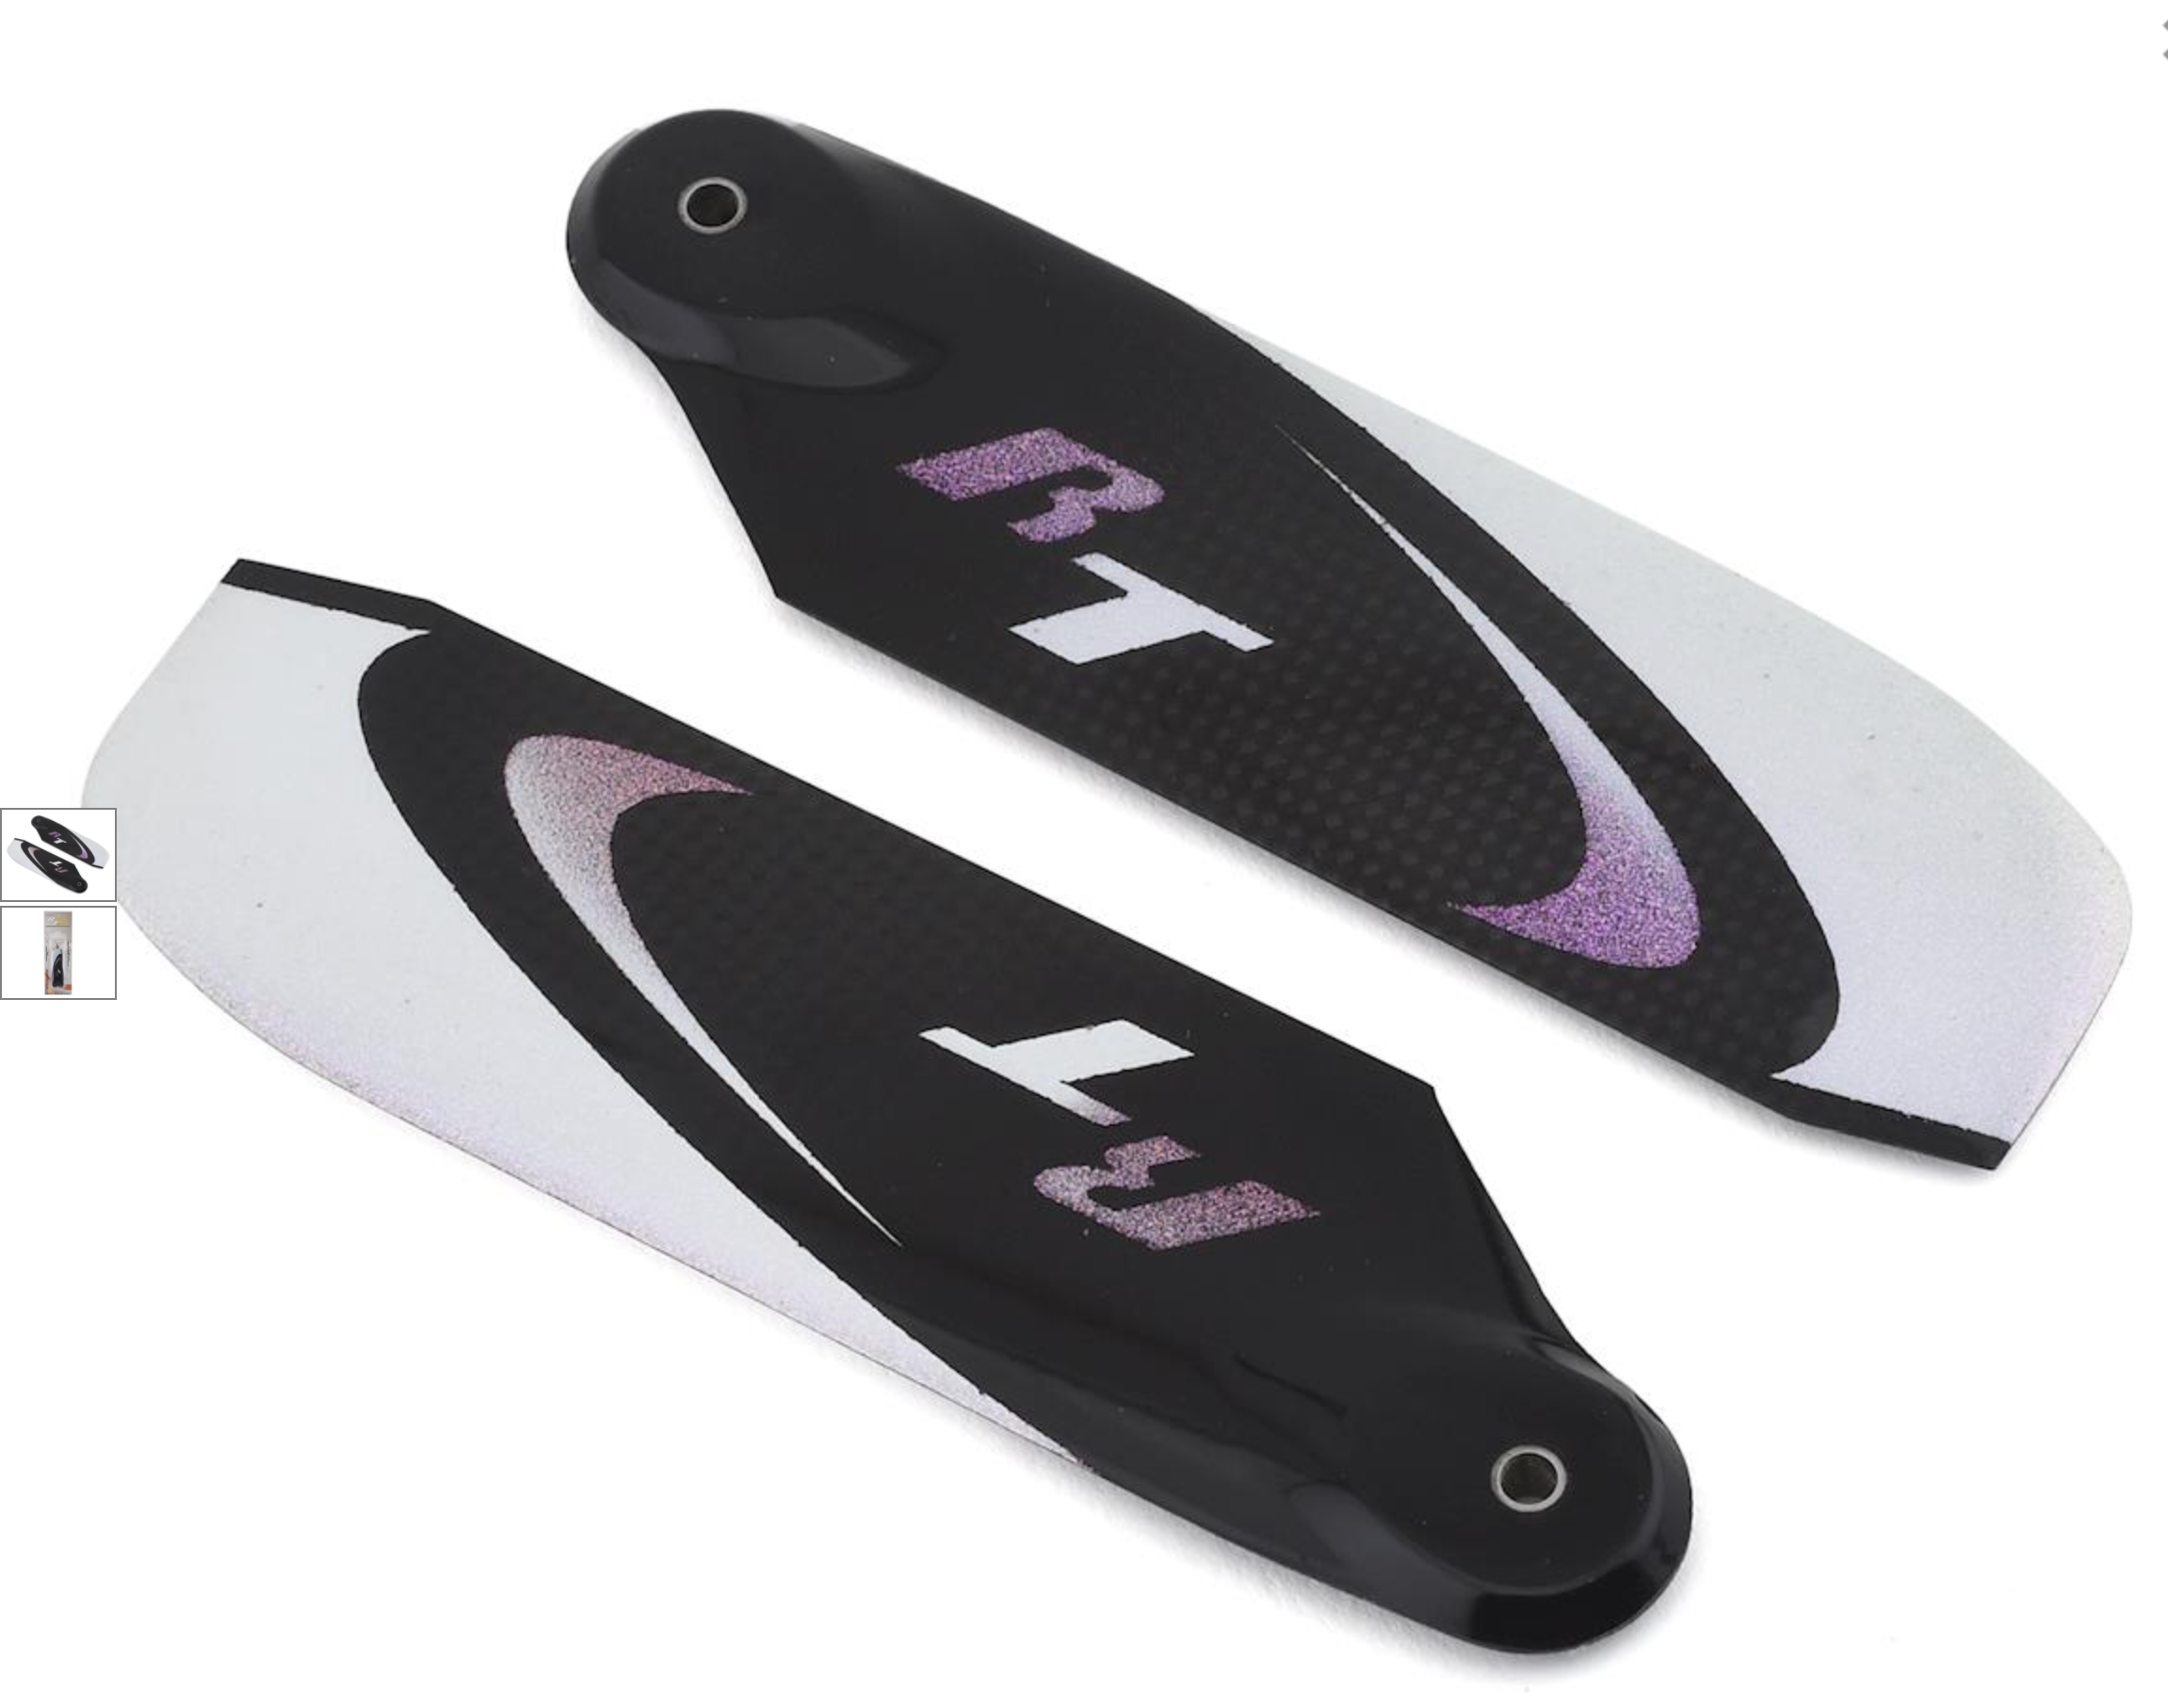 RotorTech 93mm "Ultimate" Tail Rotor Blade Set